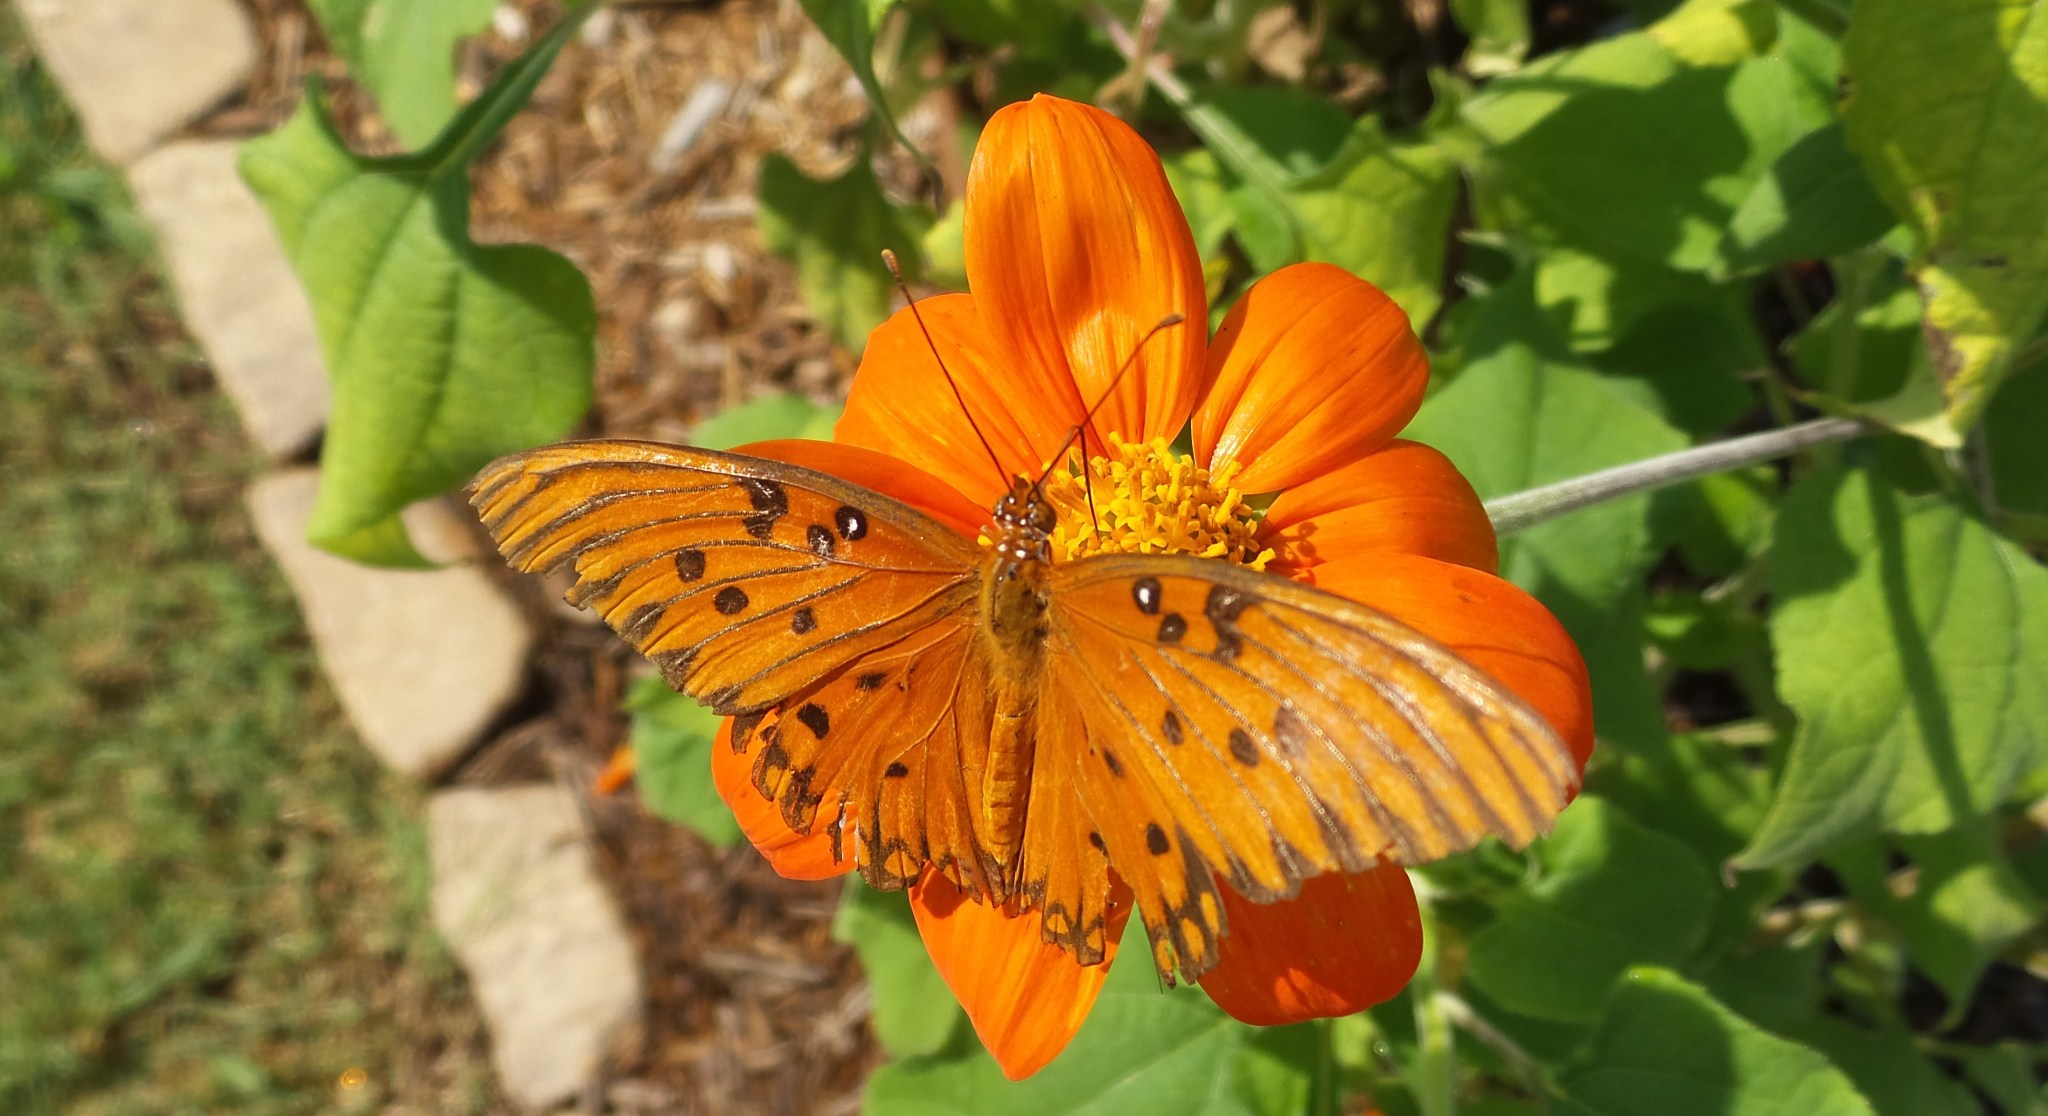 A Gulf fritillary butterfly lands on a Mexican sunflower in the pollinator habitat at NASA’s Marshall Space Flight Center during Pollinator Week, held June 21-27.